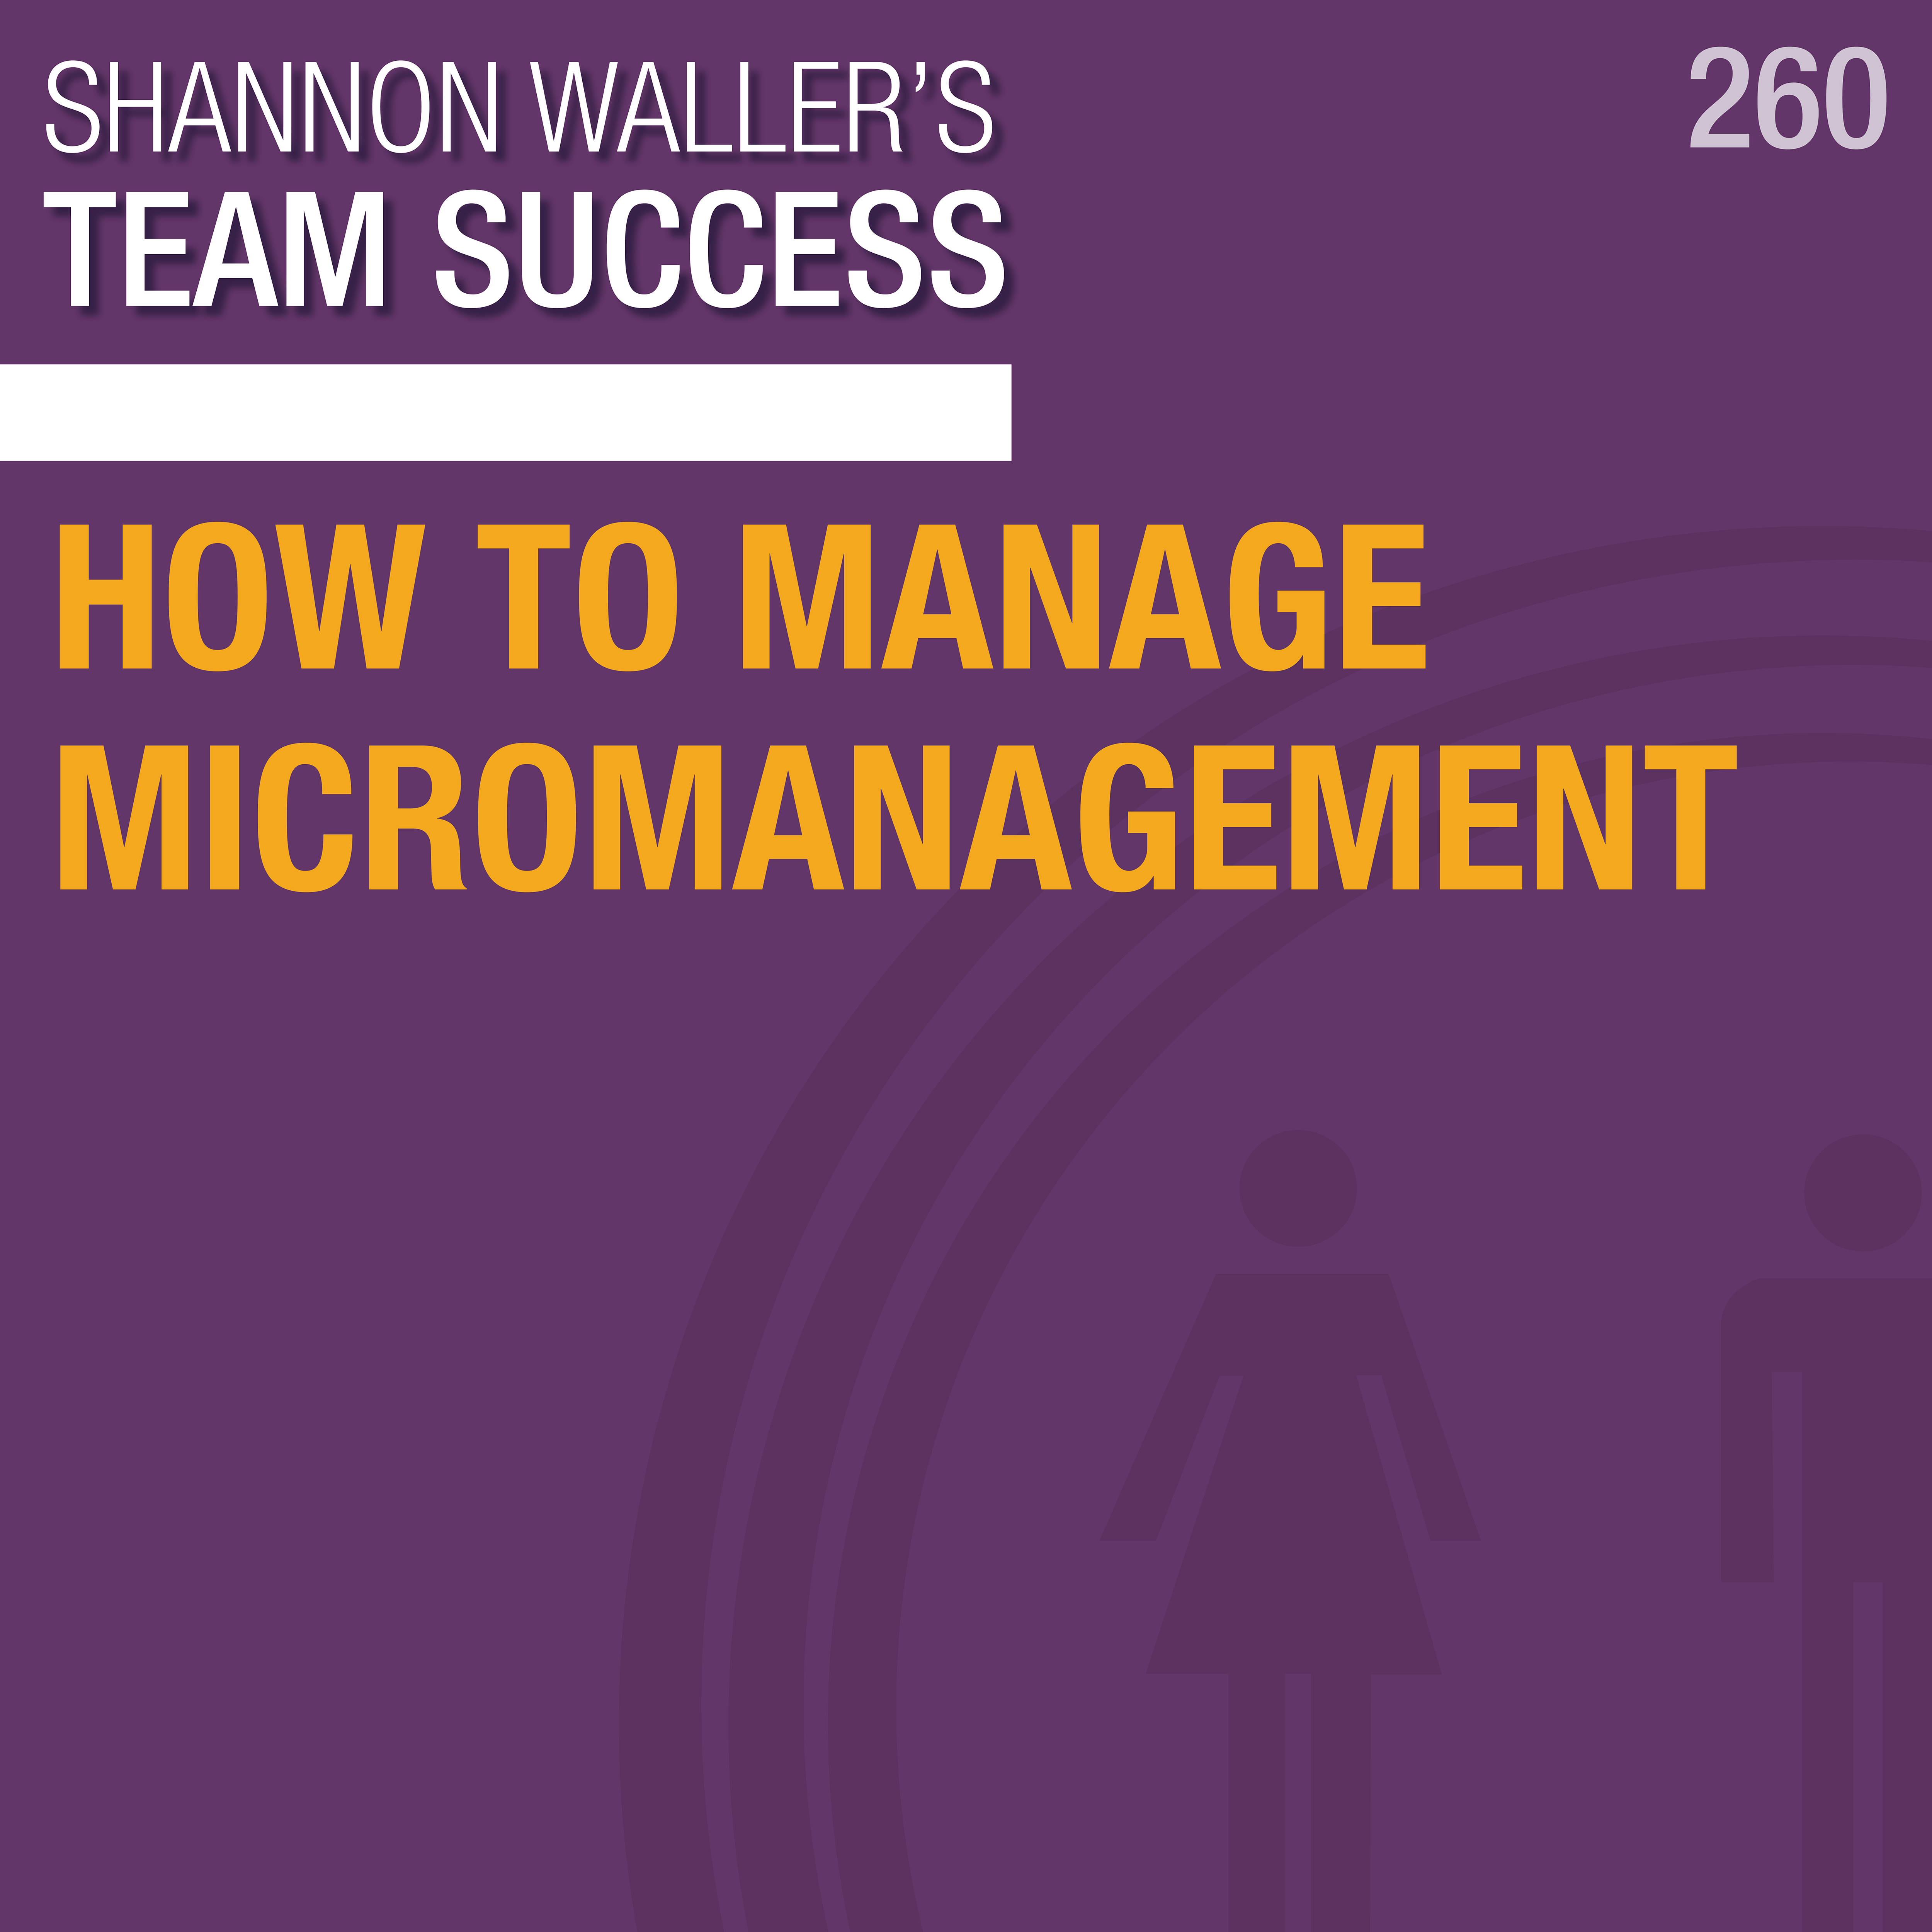 TeamSuccessPodcast_HowToManageMicromanagement_ep260.png